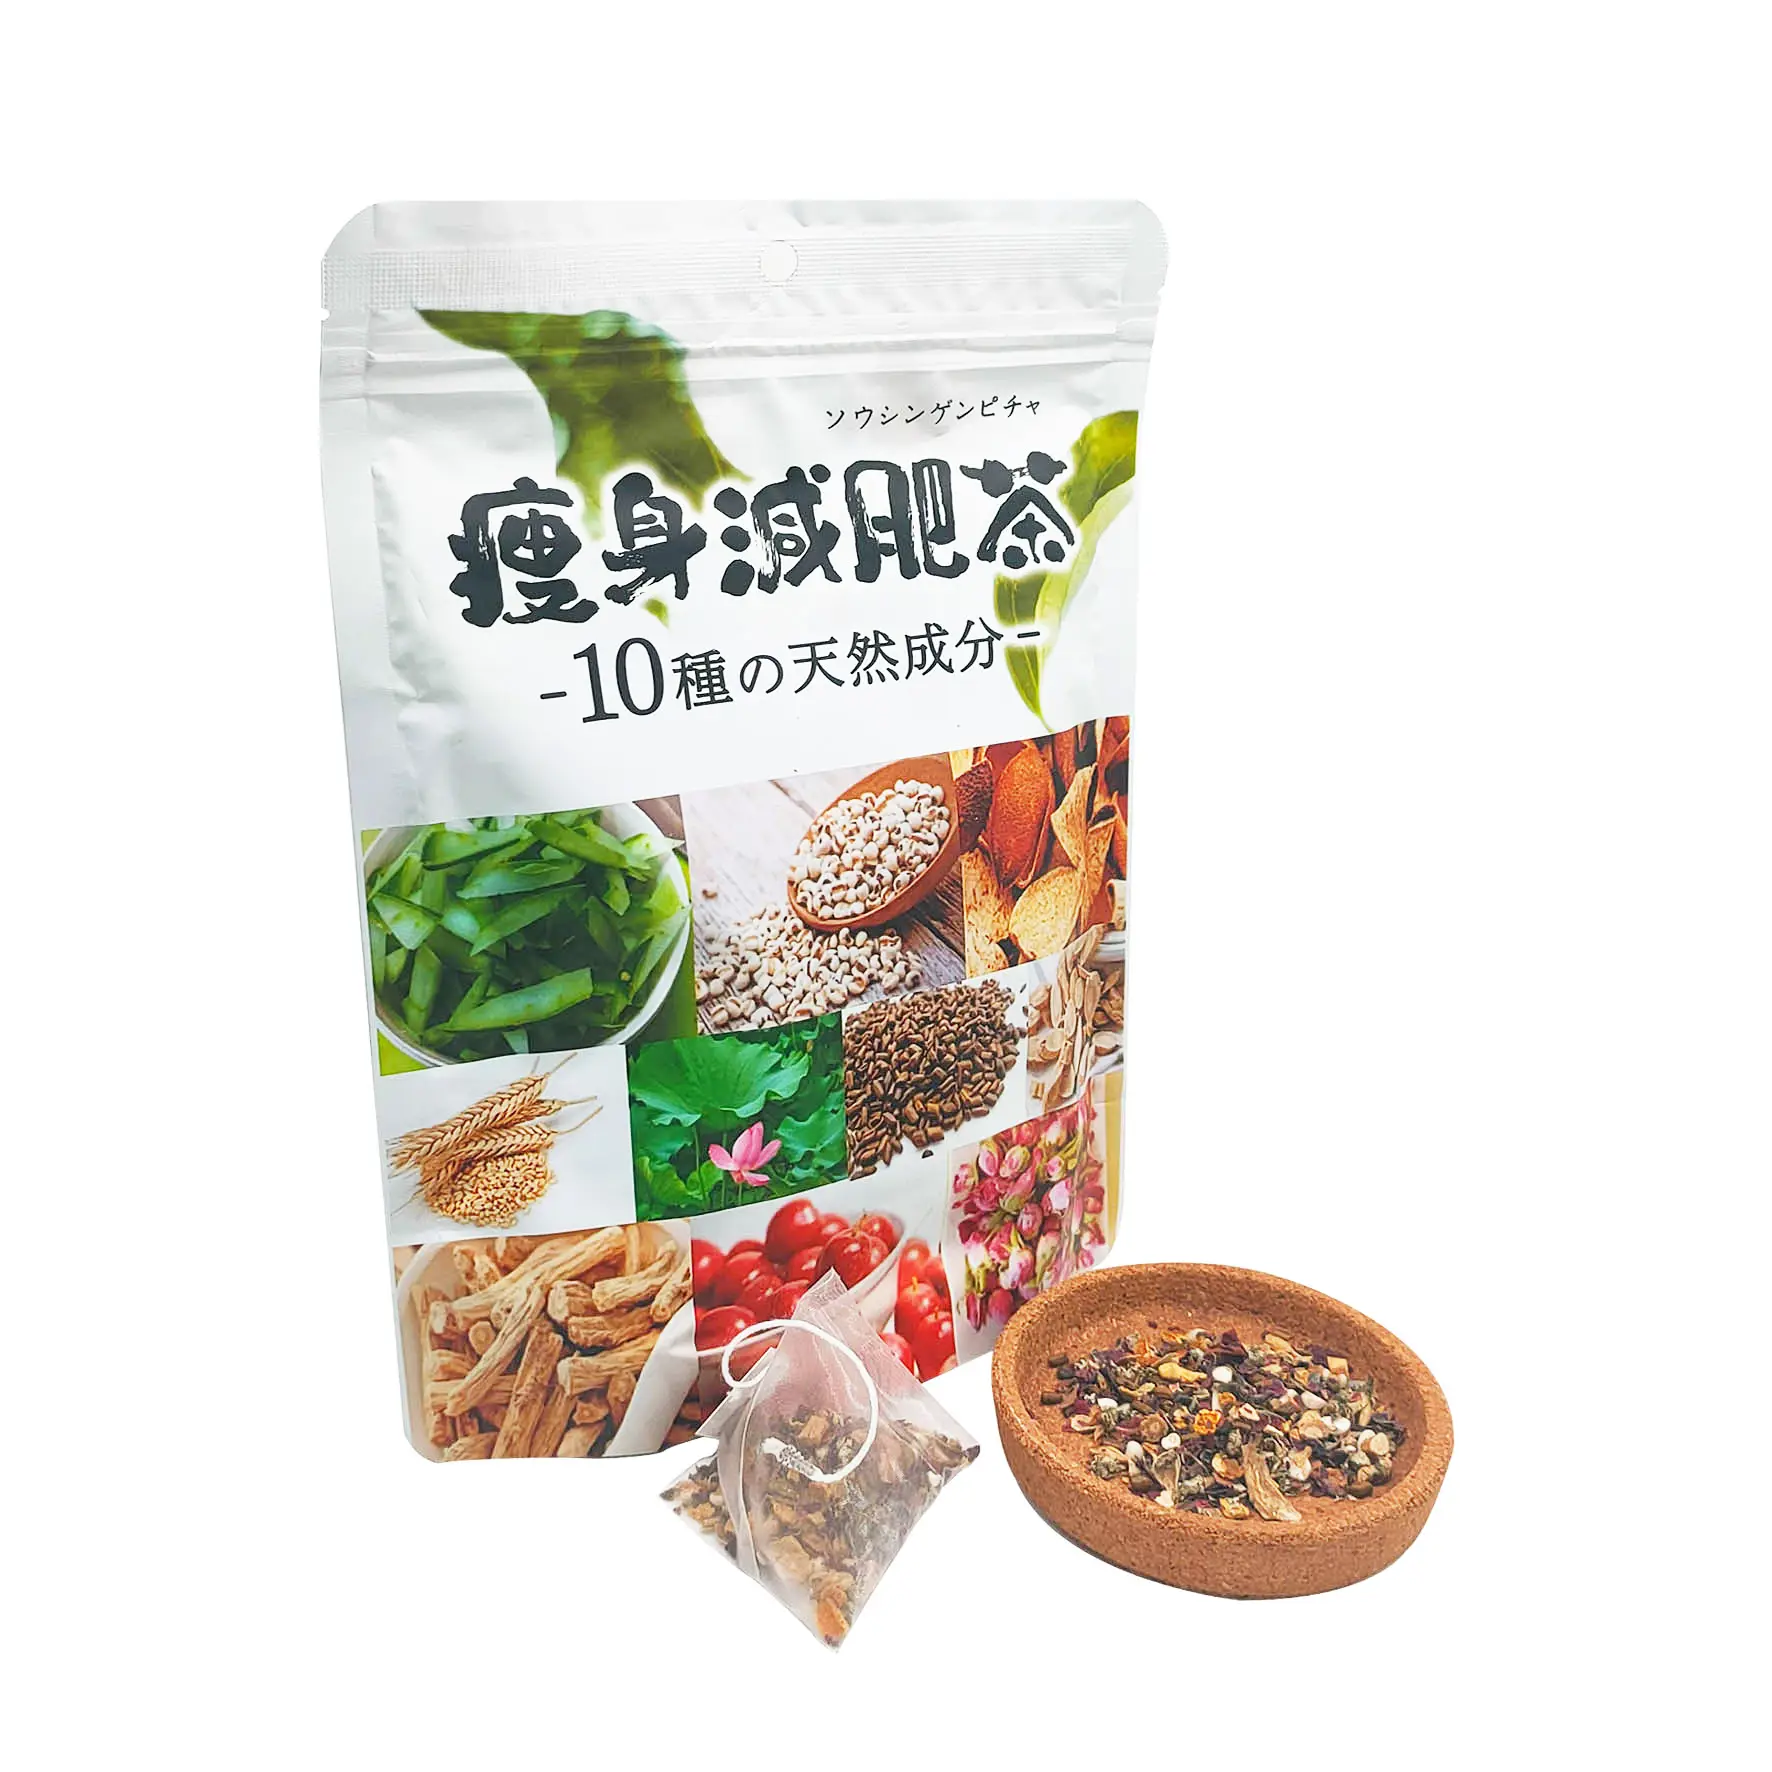 factory Outlet organic slimming tea weight loss Herbal tea